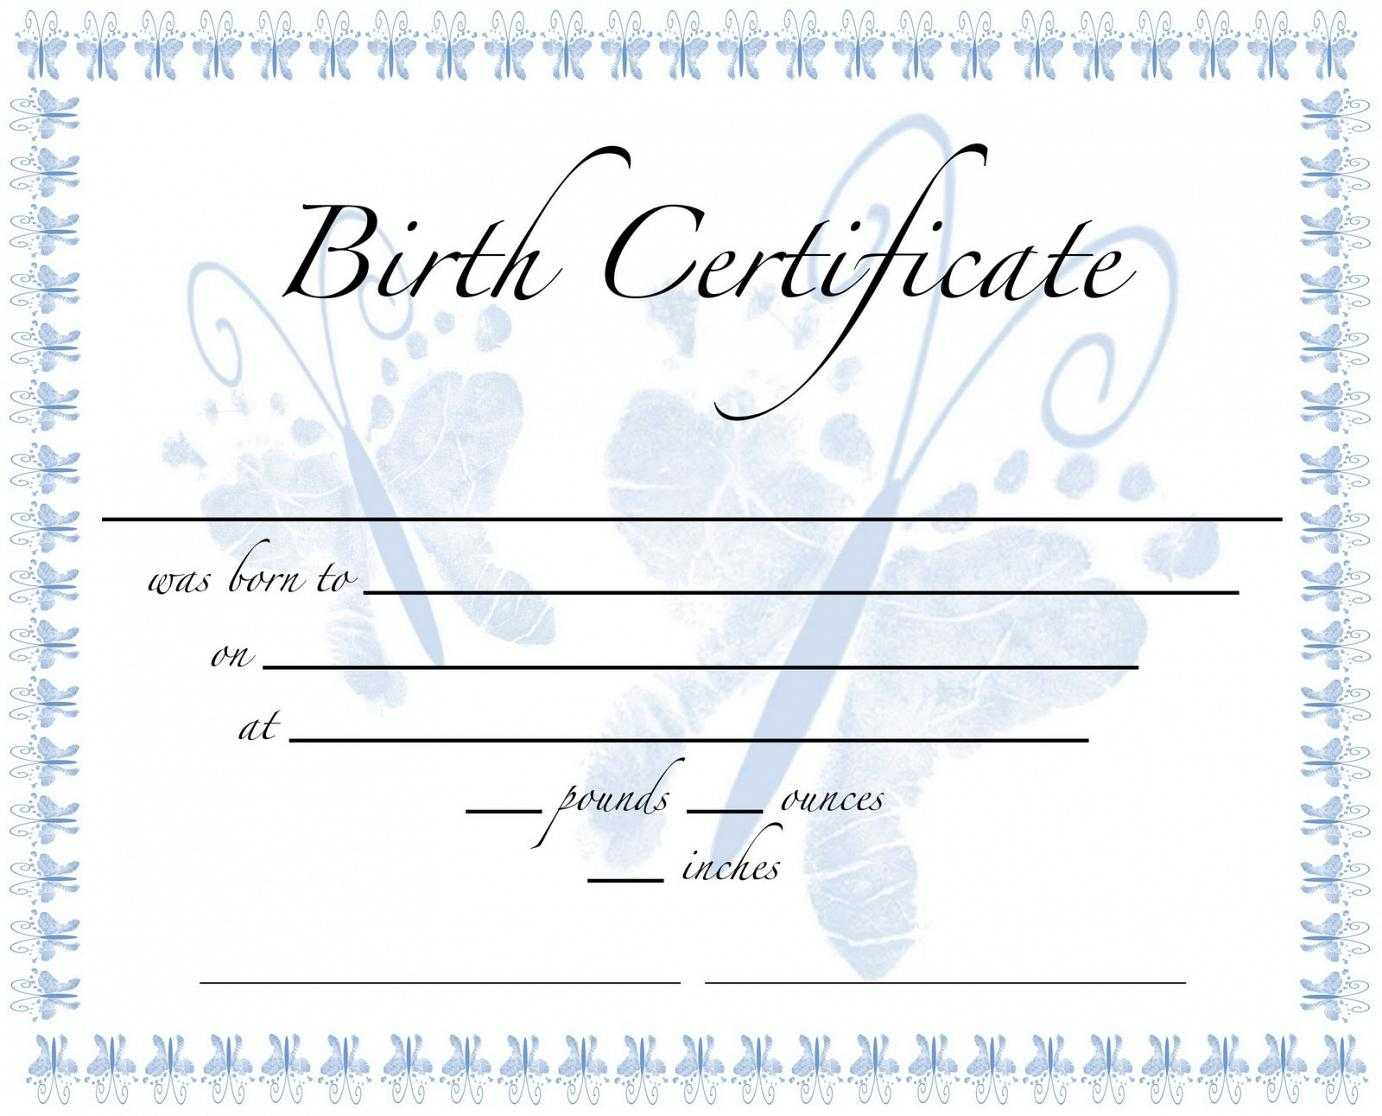 Remarkable Customized Birth Certificate Template Sample With Within Birth Certificate Fake Template